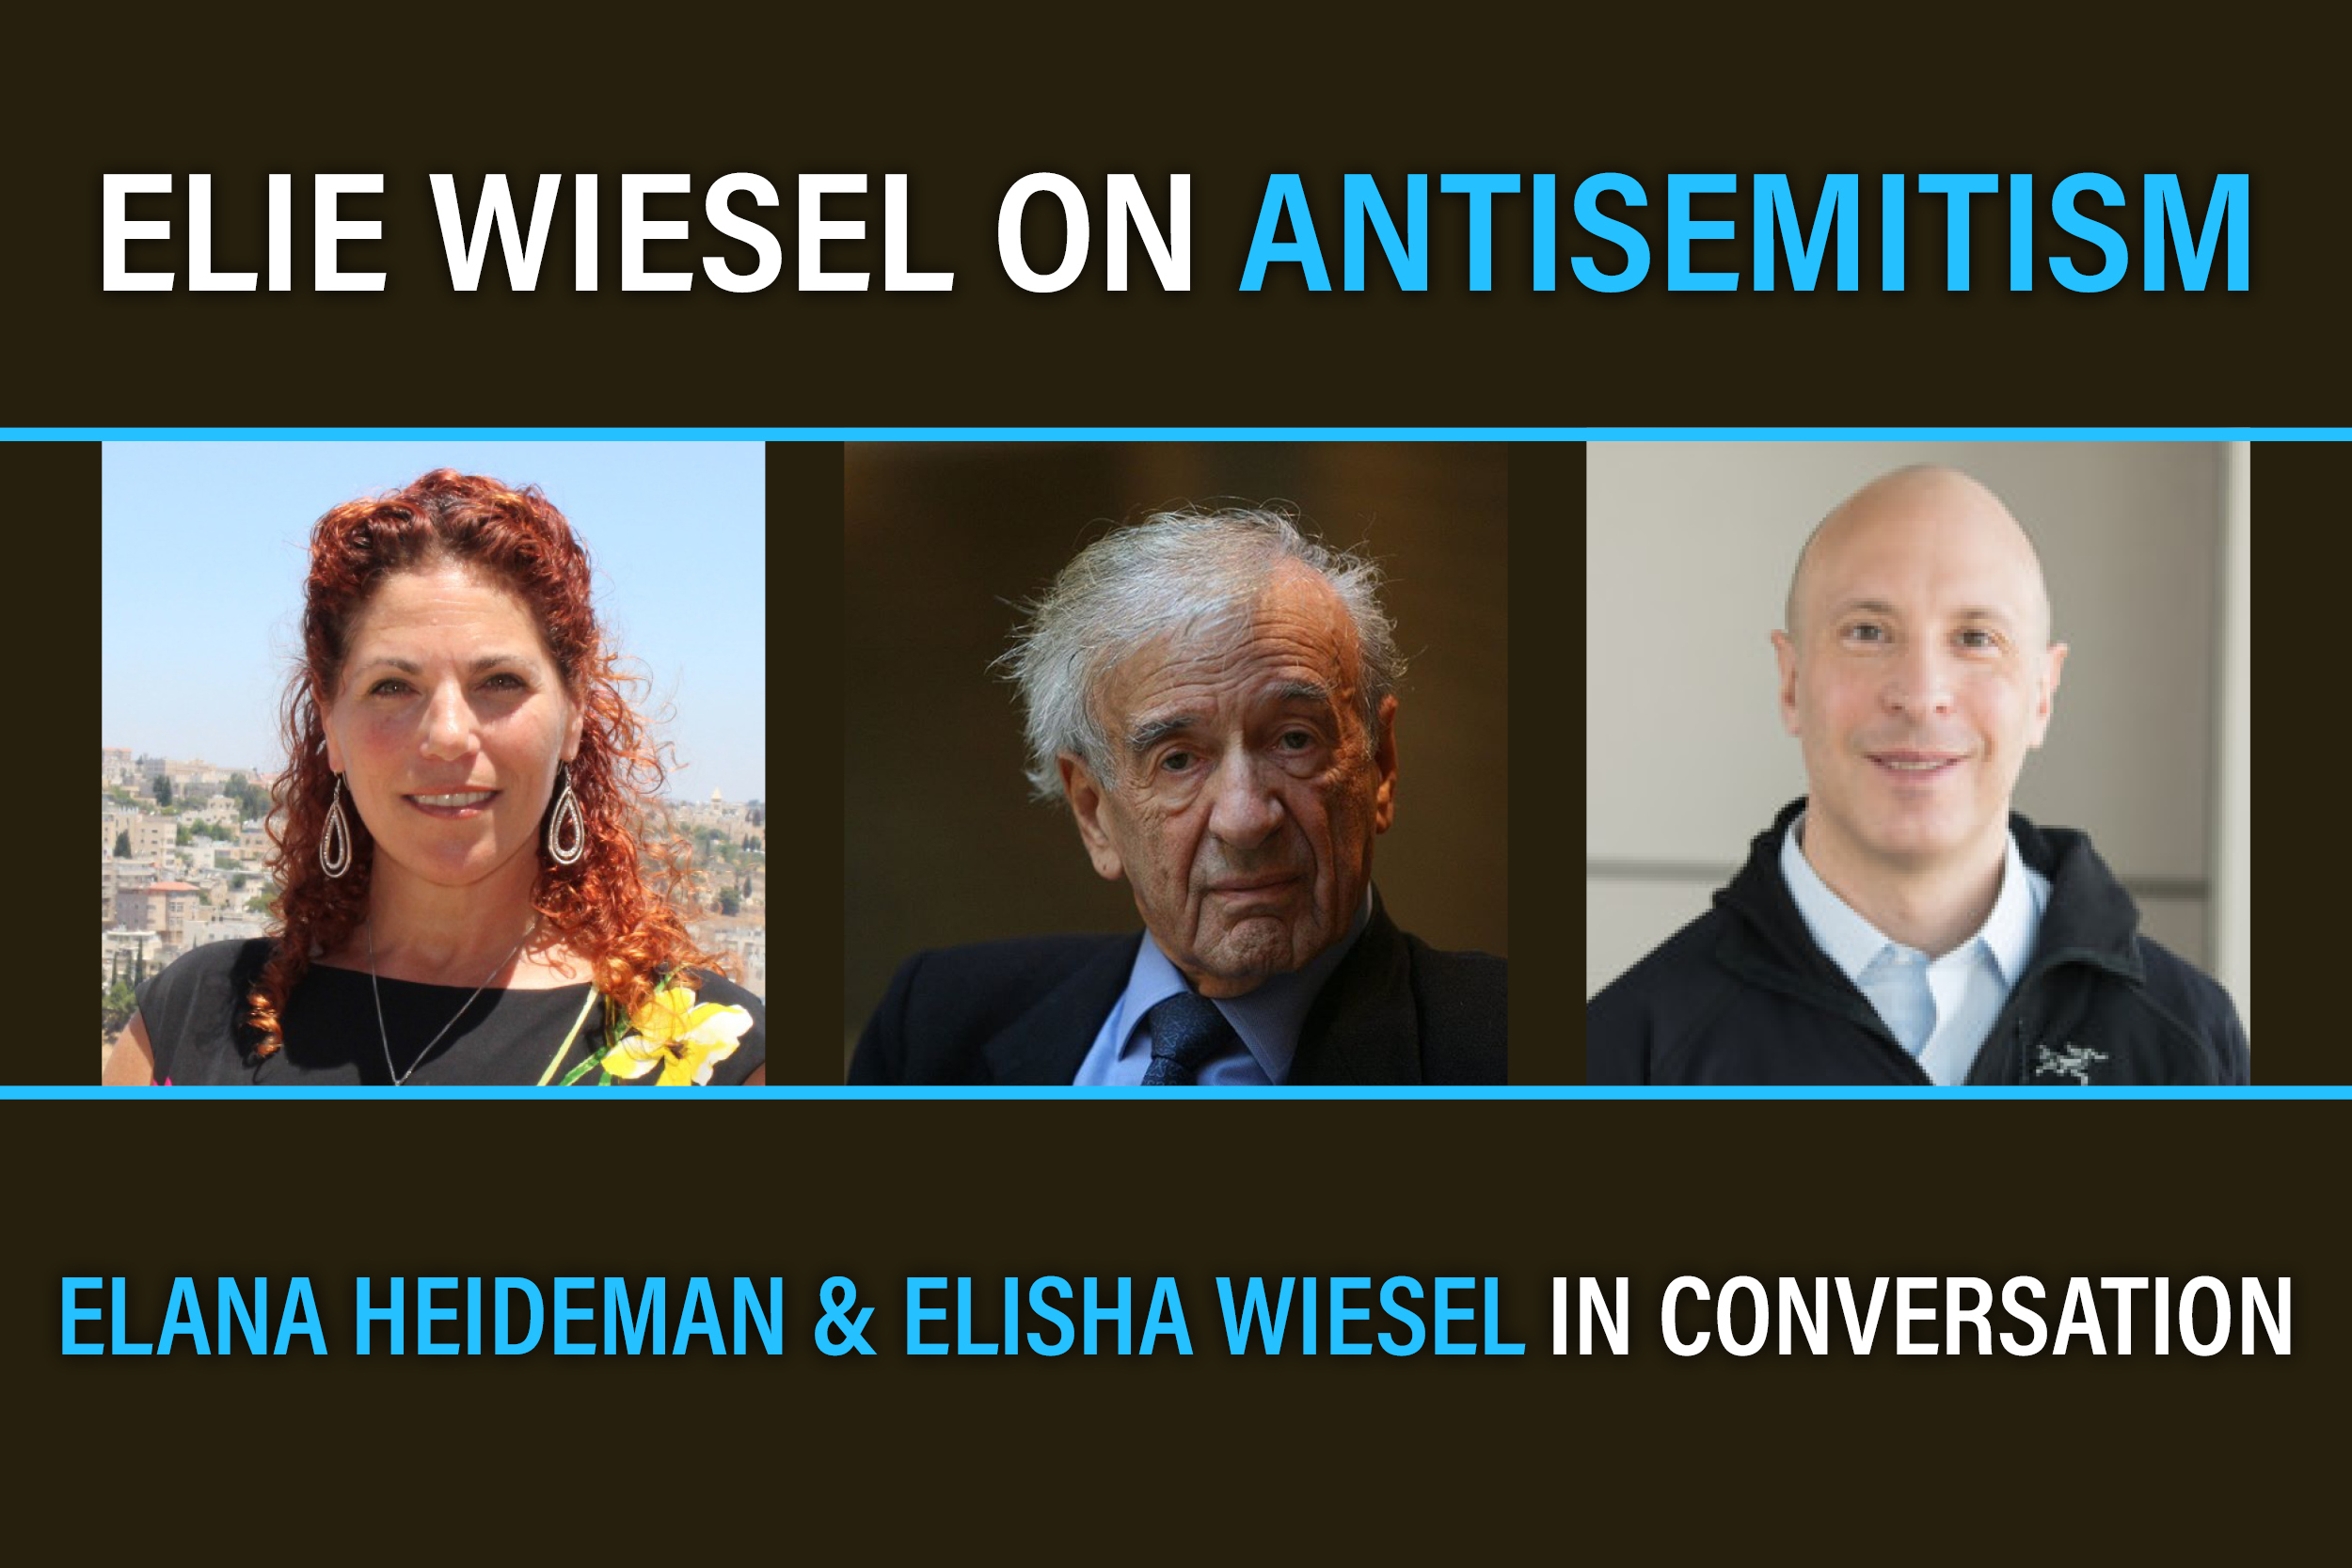 Elie Wiesel on Antisemitism: Fear, Memory and Action